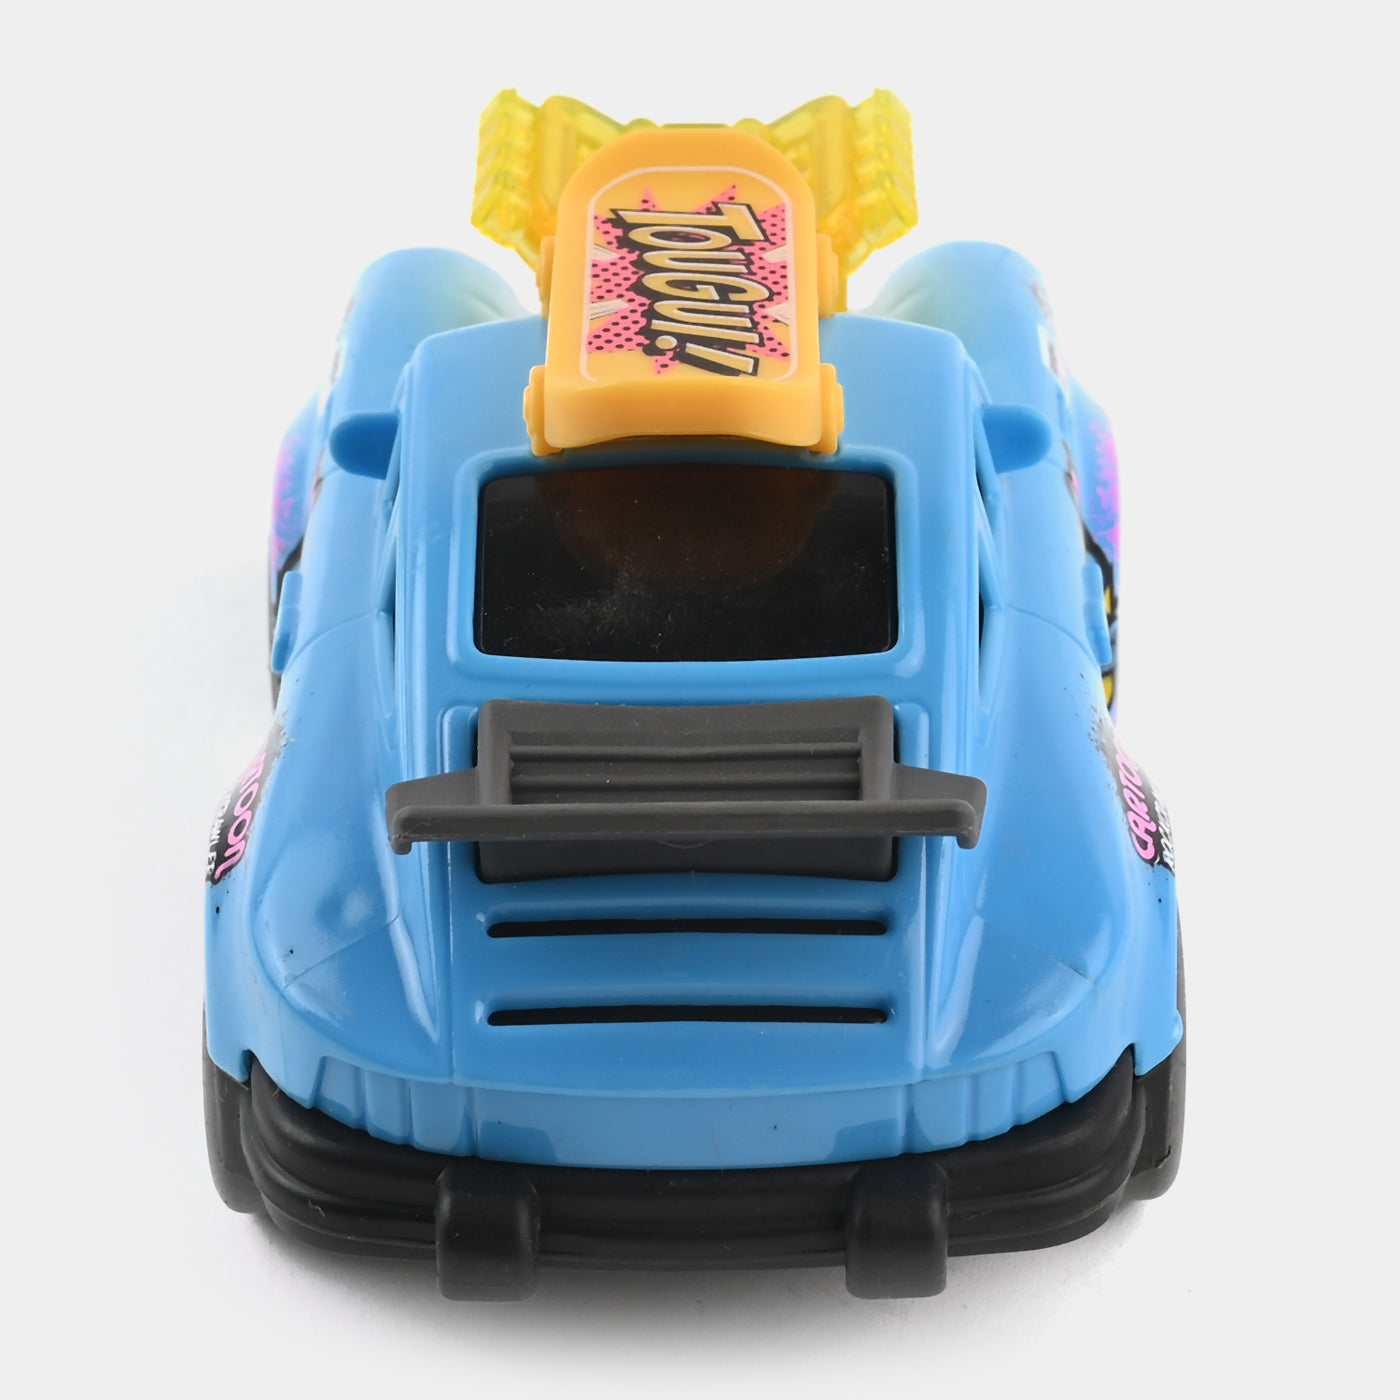 COUNTER TOY FUN CAR FOR KIDS